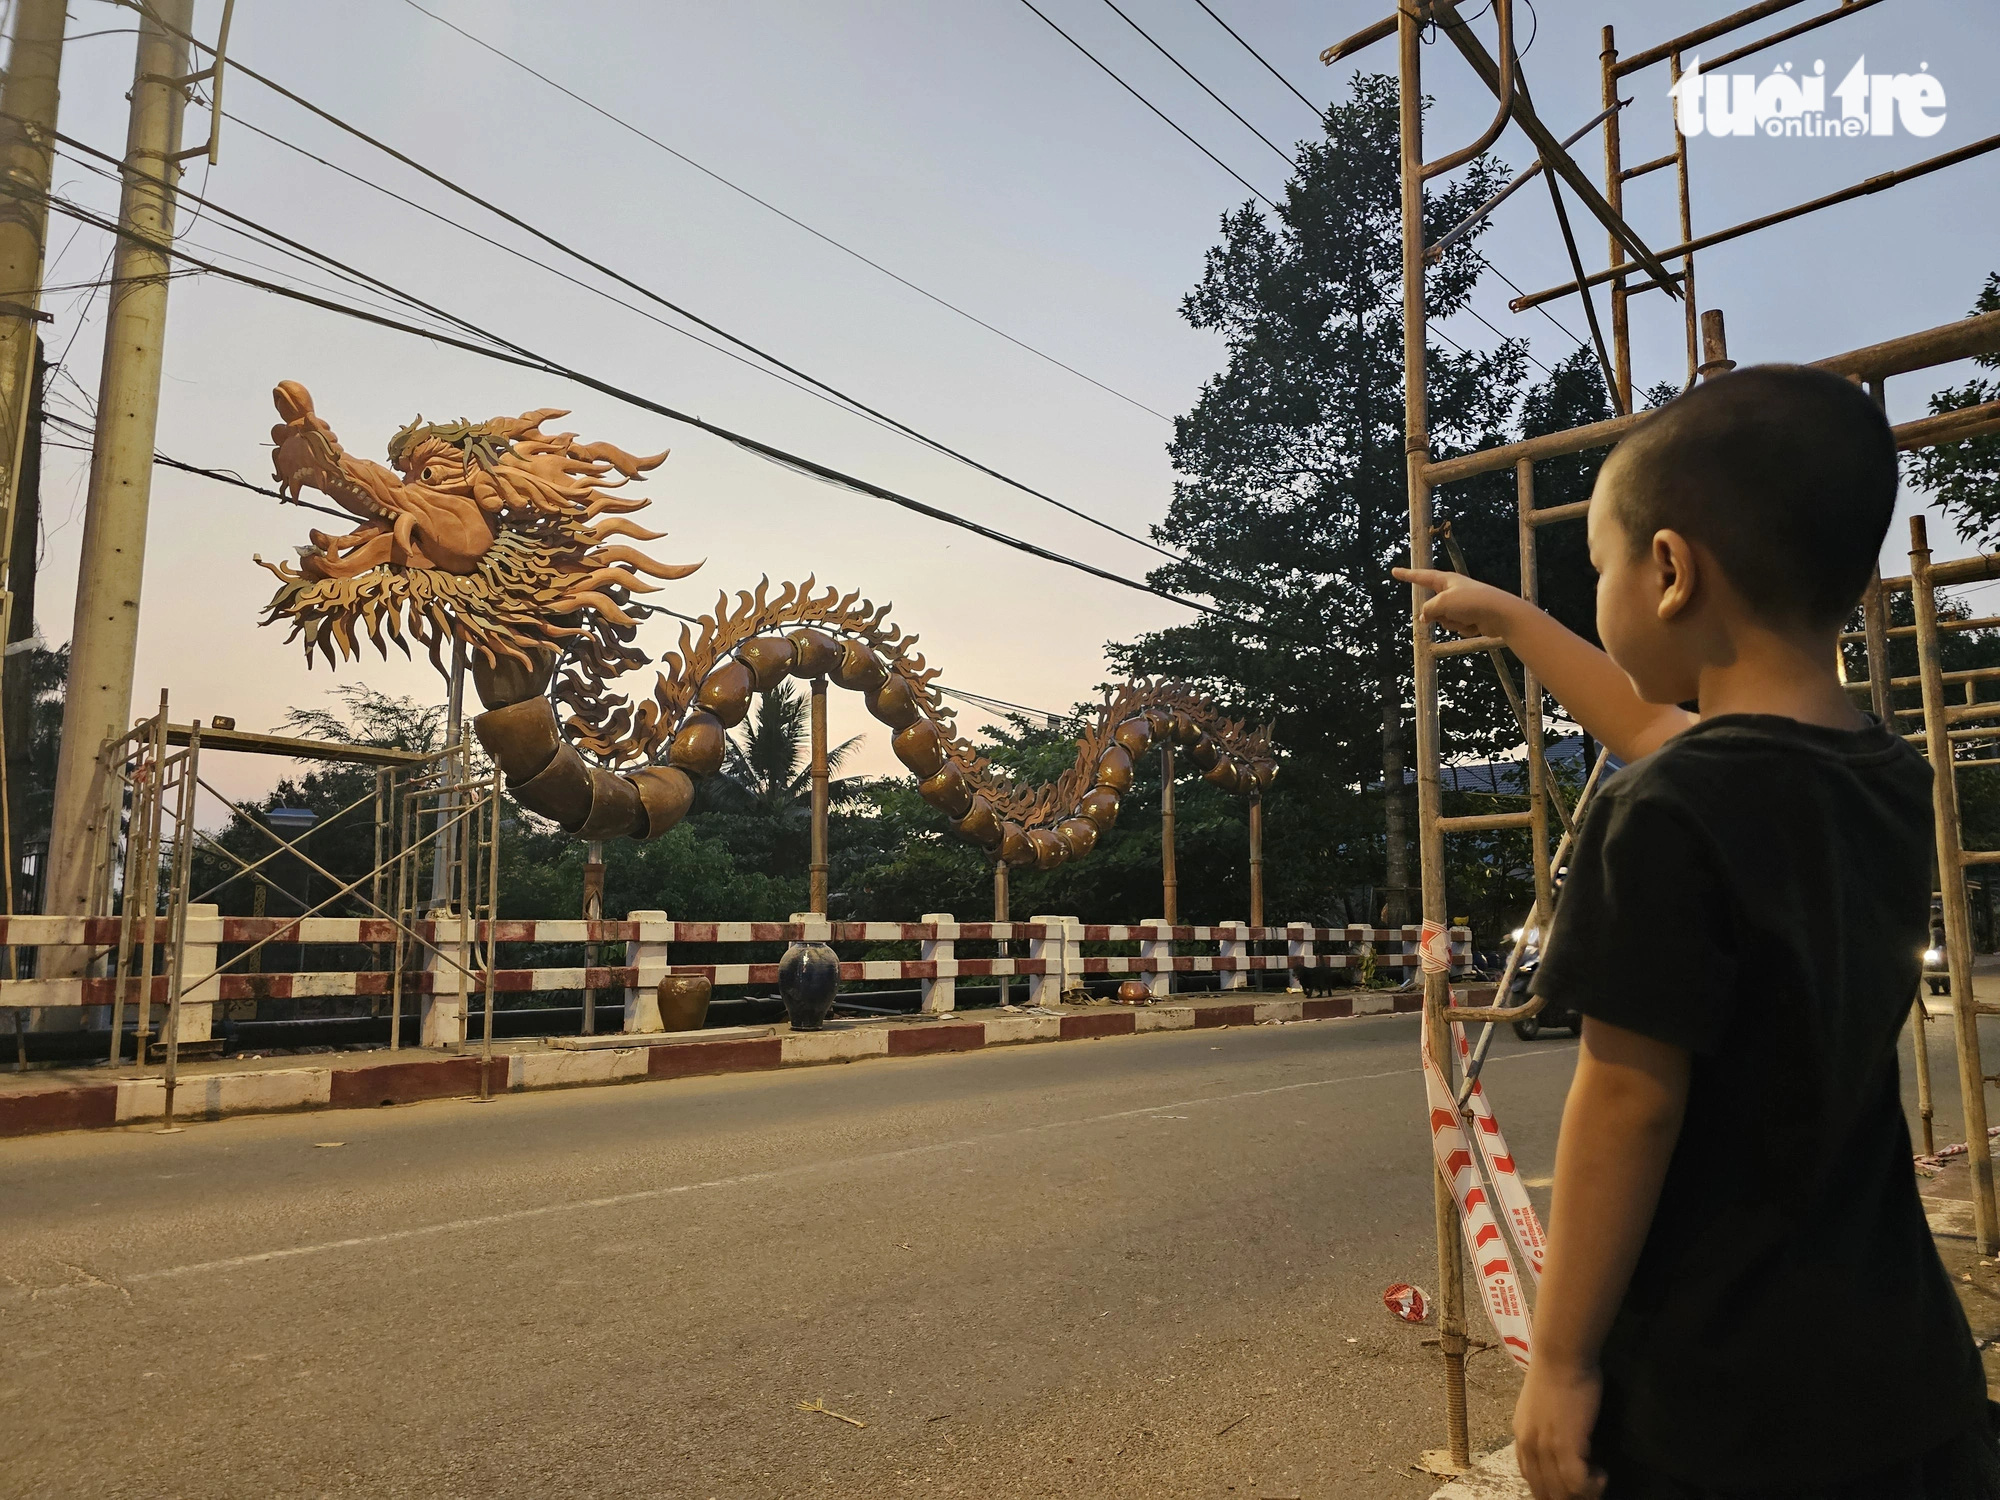 A local boy gazes excitedly at the ceramic dragons still under construction in Binh Duong Province, southern Vietnam, January 24, 2023. Photo: Ba Son / Tuoi Tre